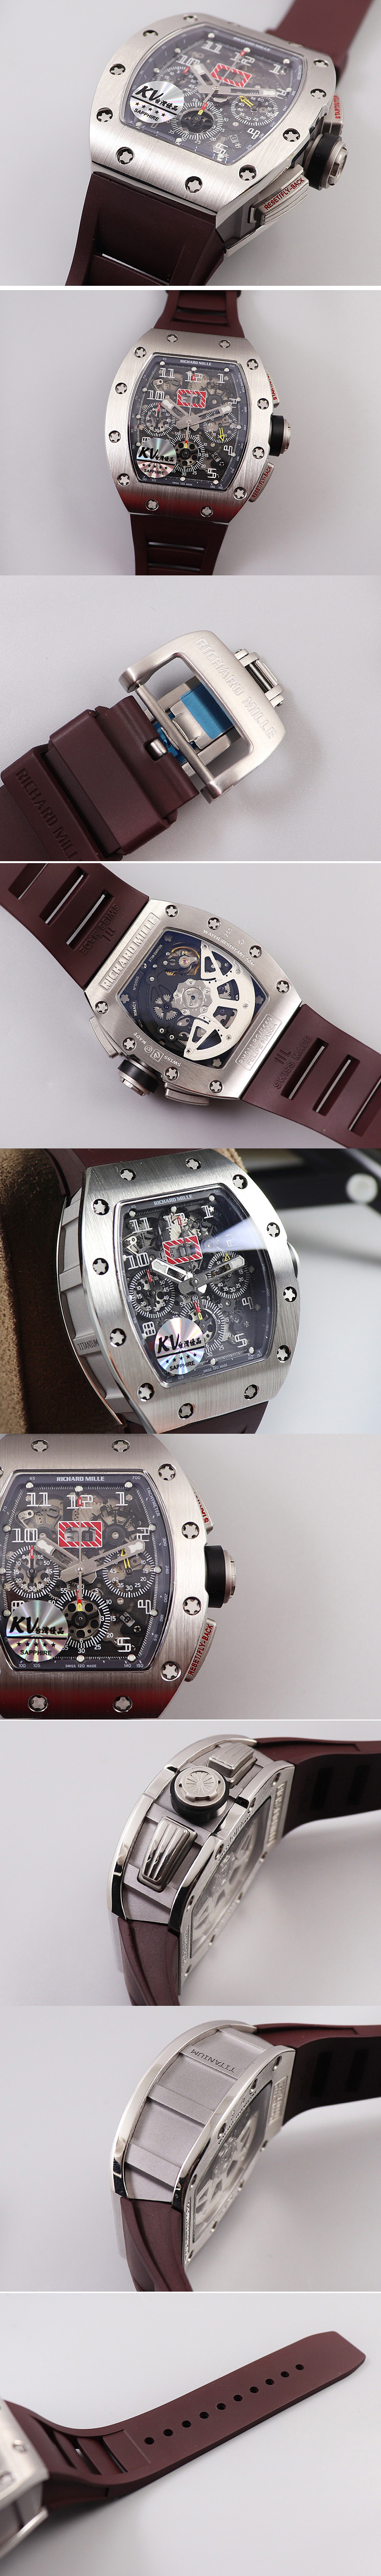 Replica Richard Mille RM011 SS Chrono KVF 1:1 Best Edition Crystal Dial Black on Brown Rubber Strap A7750